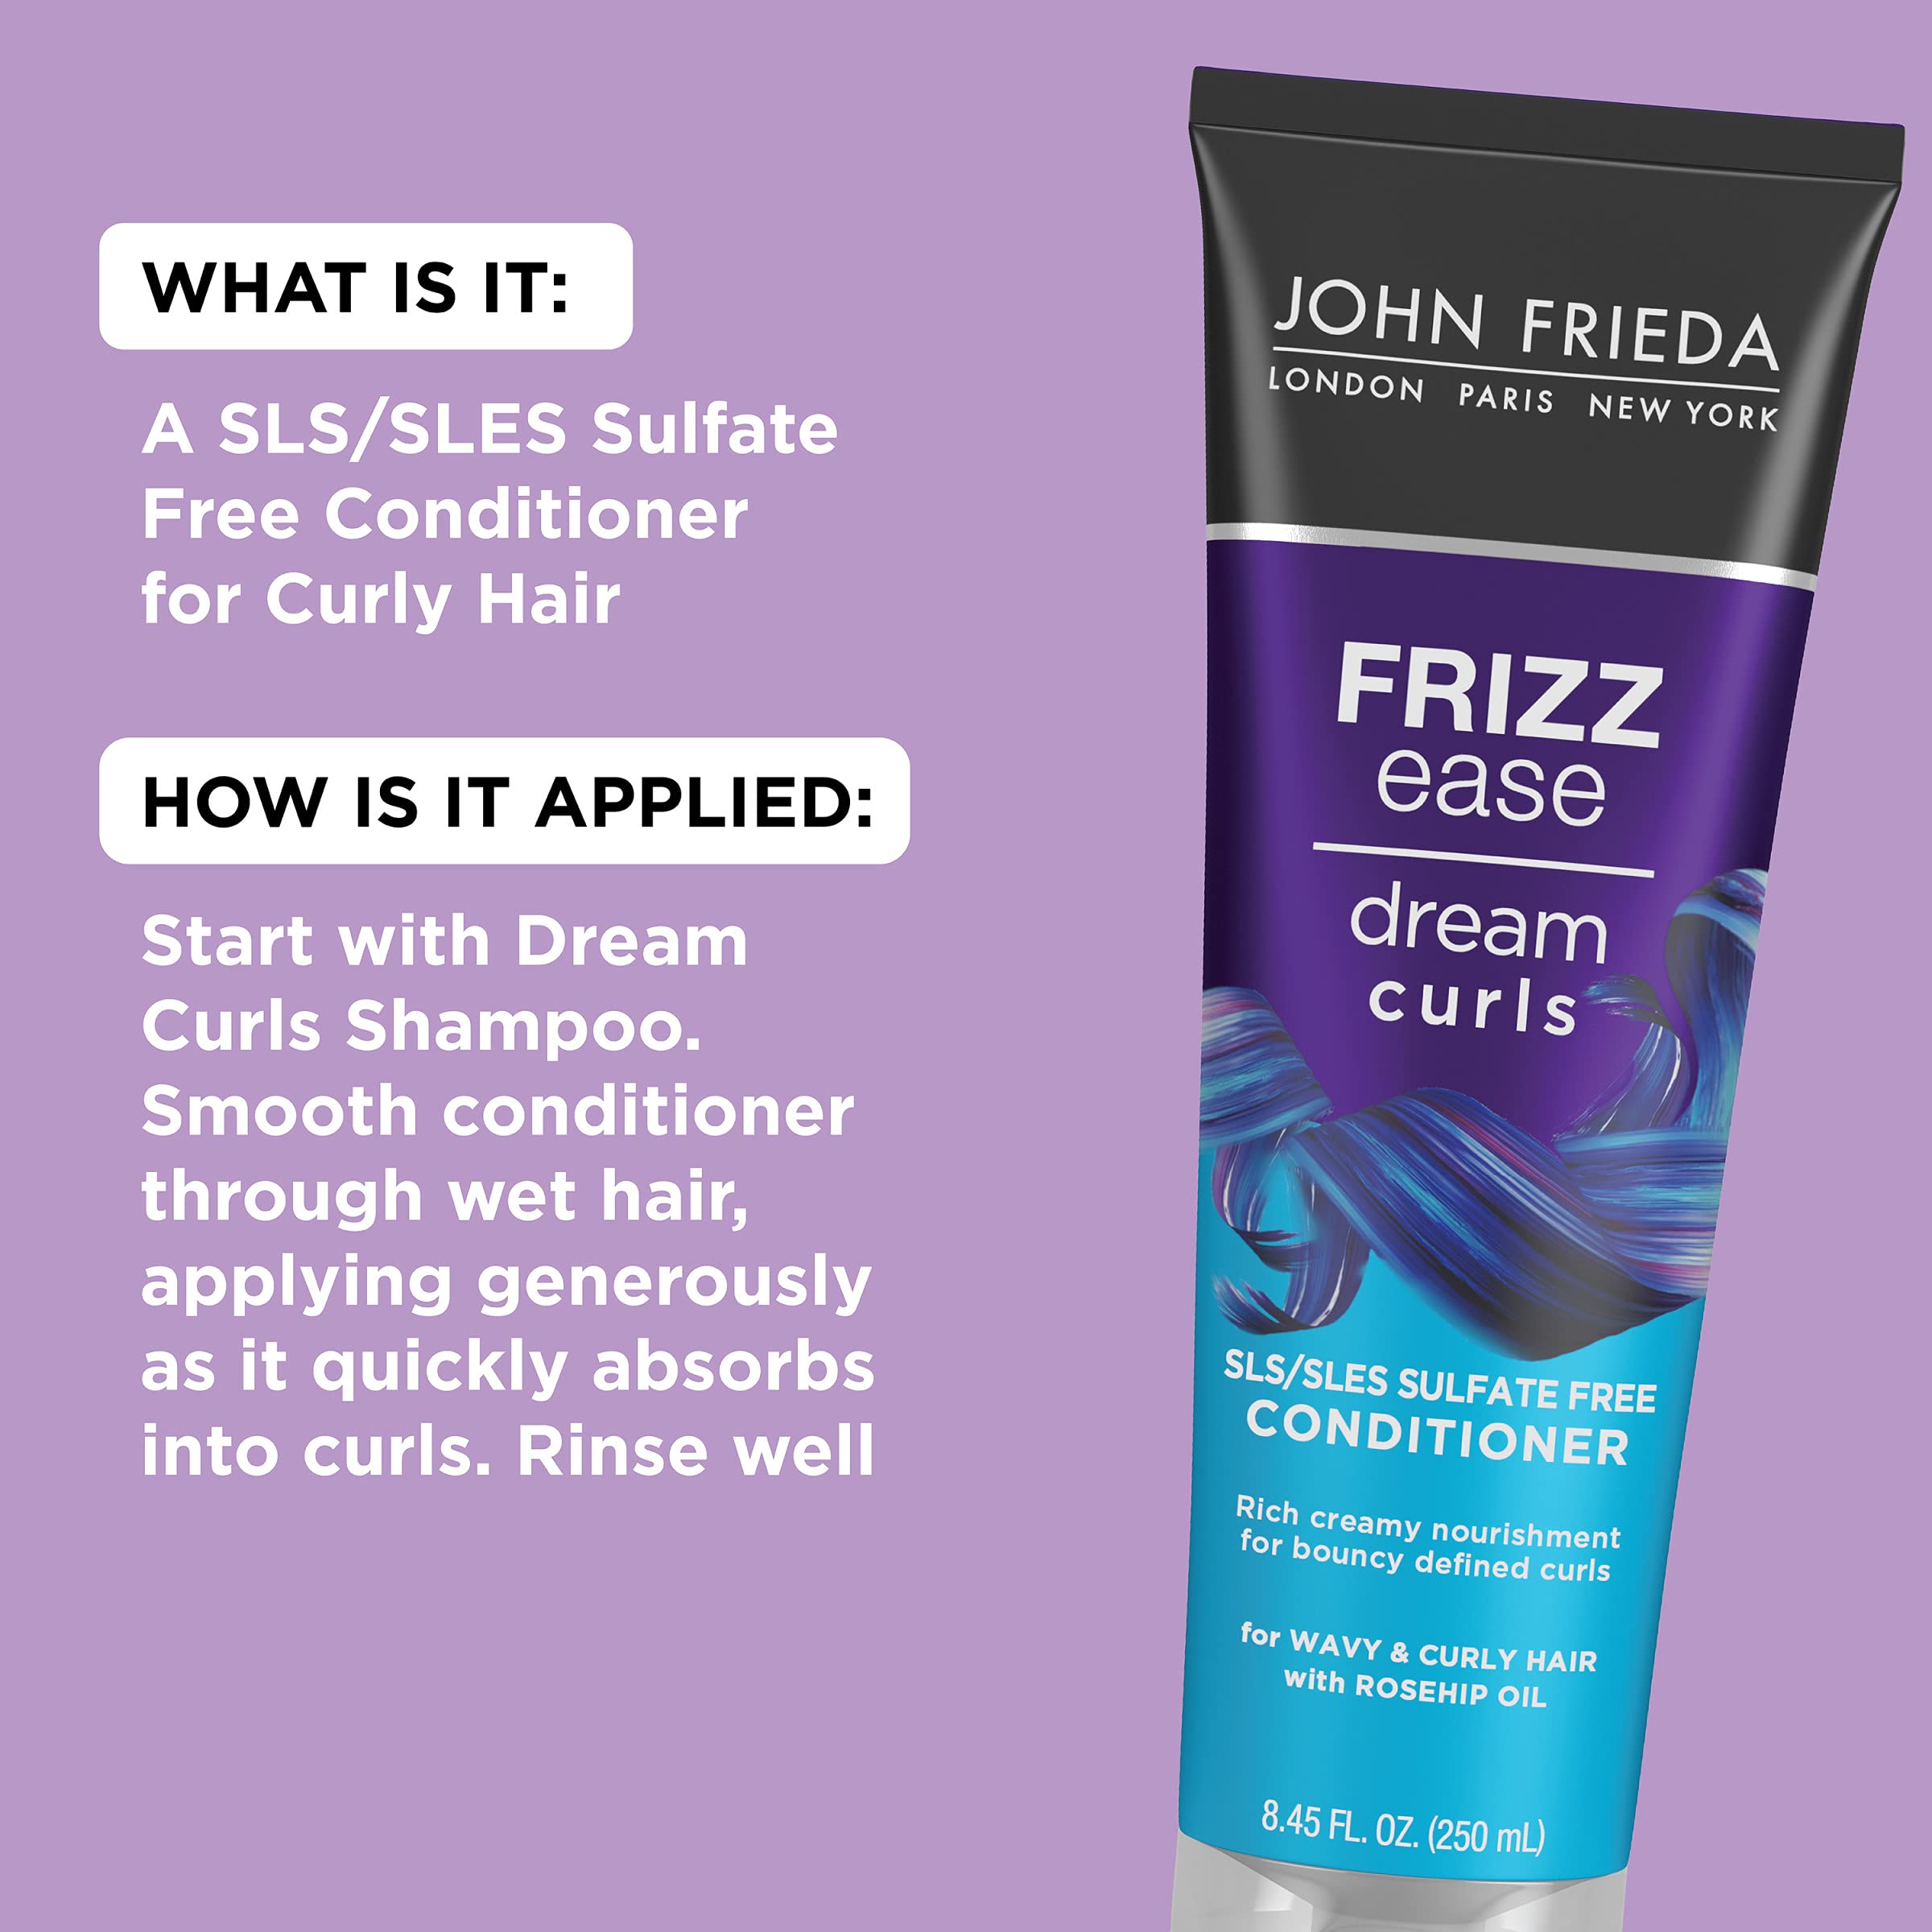 John Frieda Frizz Ease Dream Curls Conditioner, Hydrates and Defines Curly, Wavy Hair, Helps Control Frizz, SLS/SLES Sulfate Free, Enhances Natural Curls, 8.45 Fluid Ounces